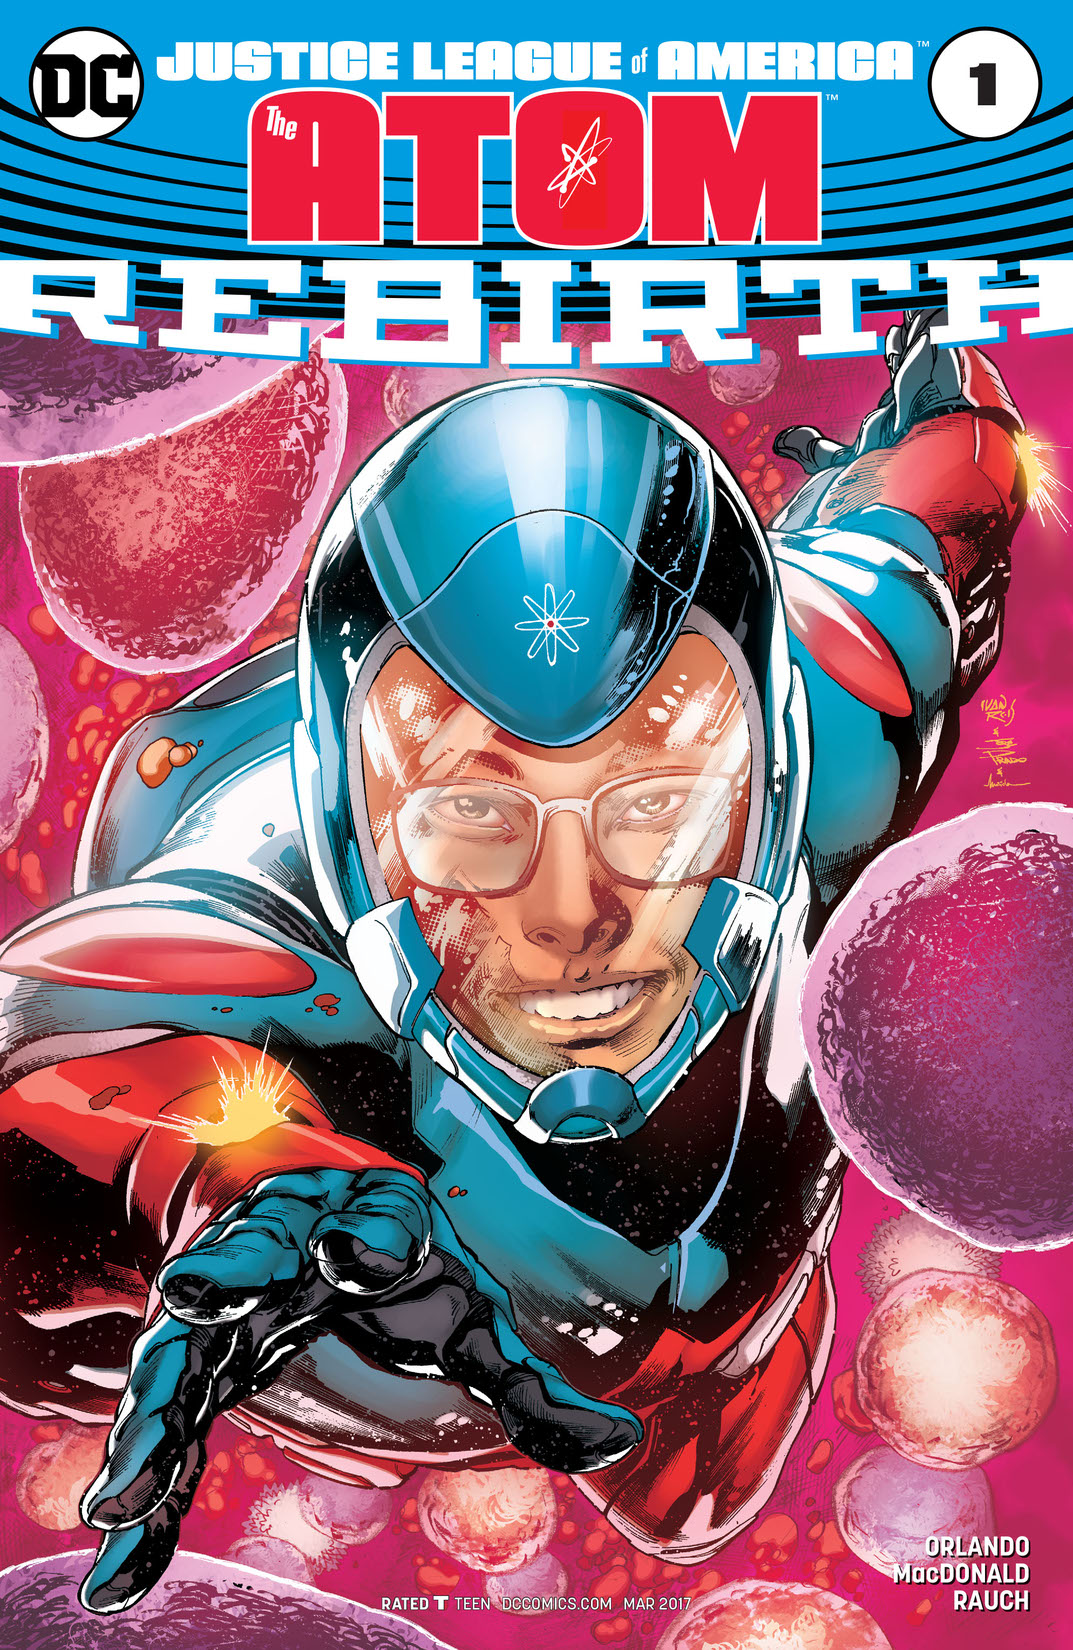 Justice League of America: The Atom Rebirth (2017-) #1 preview images